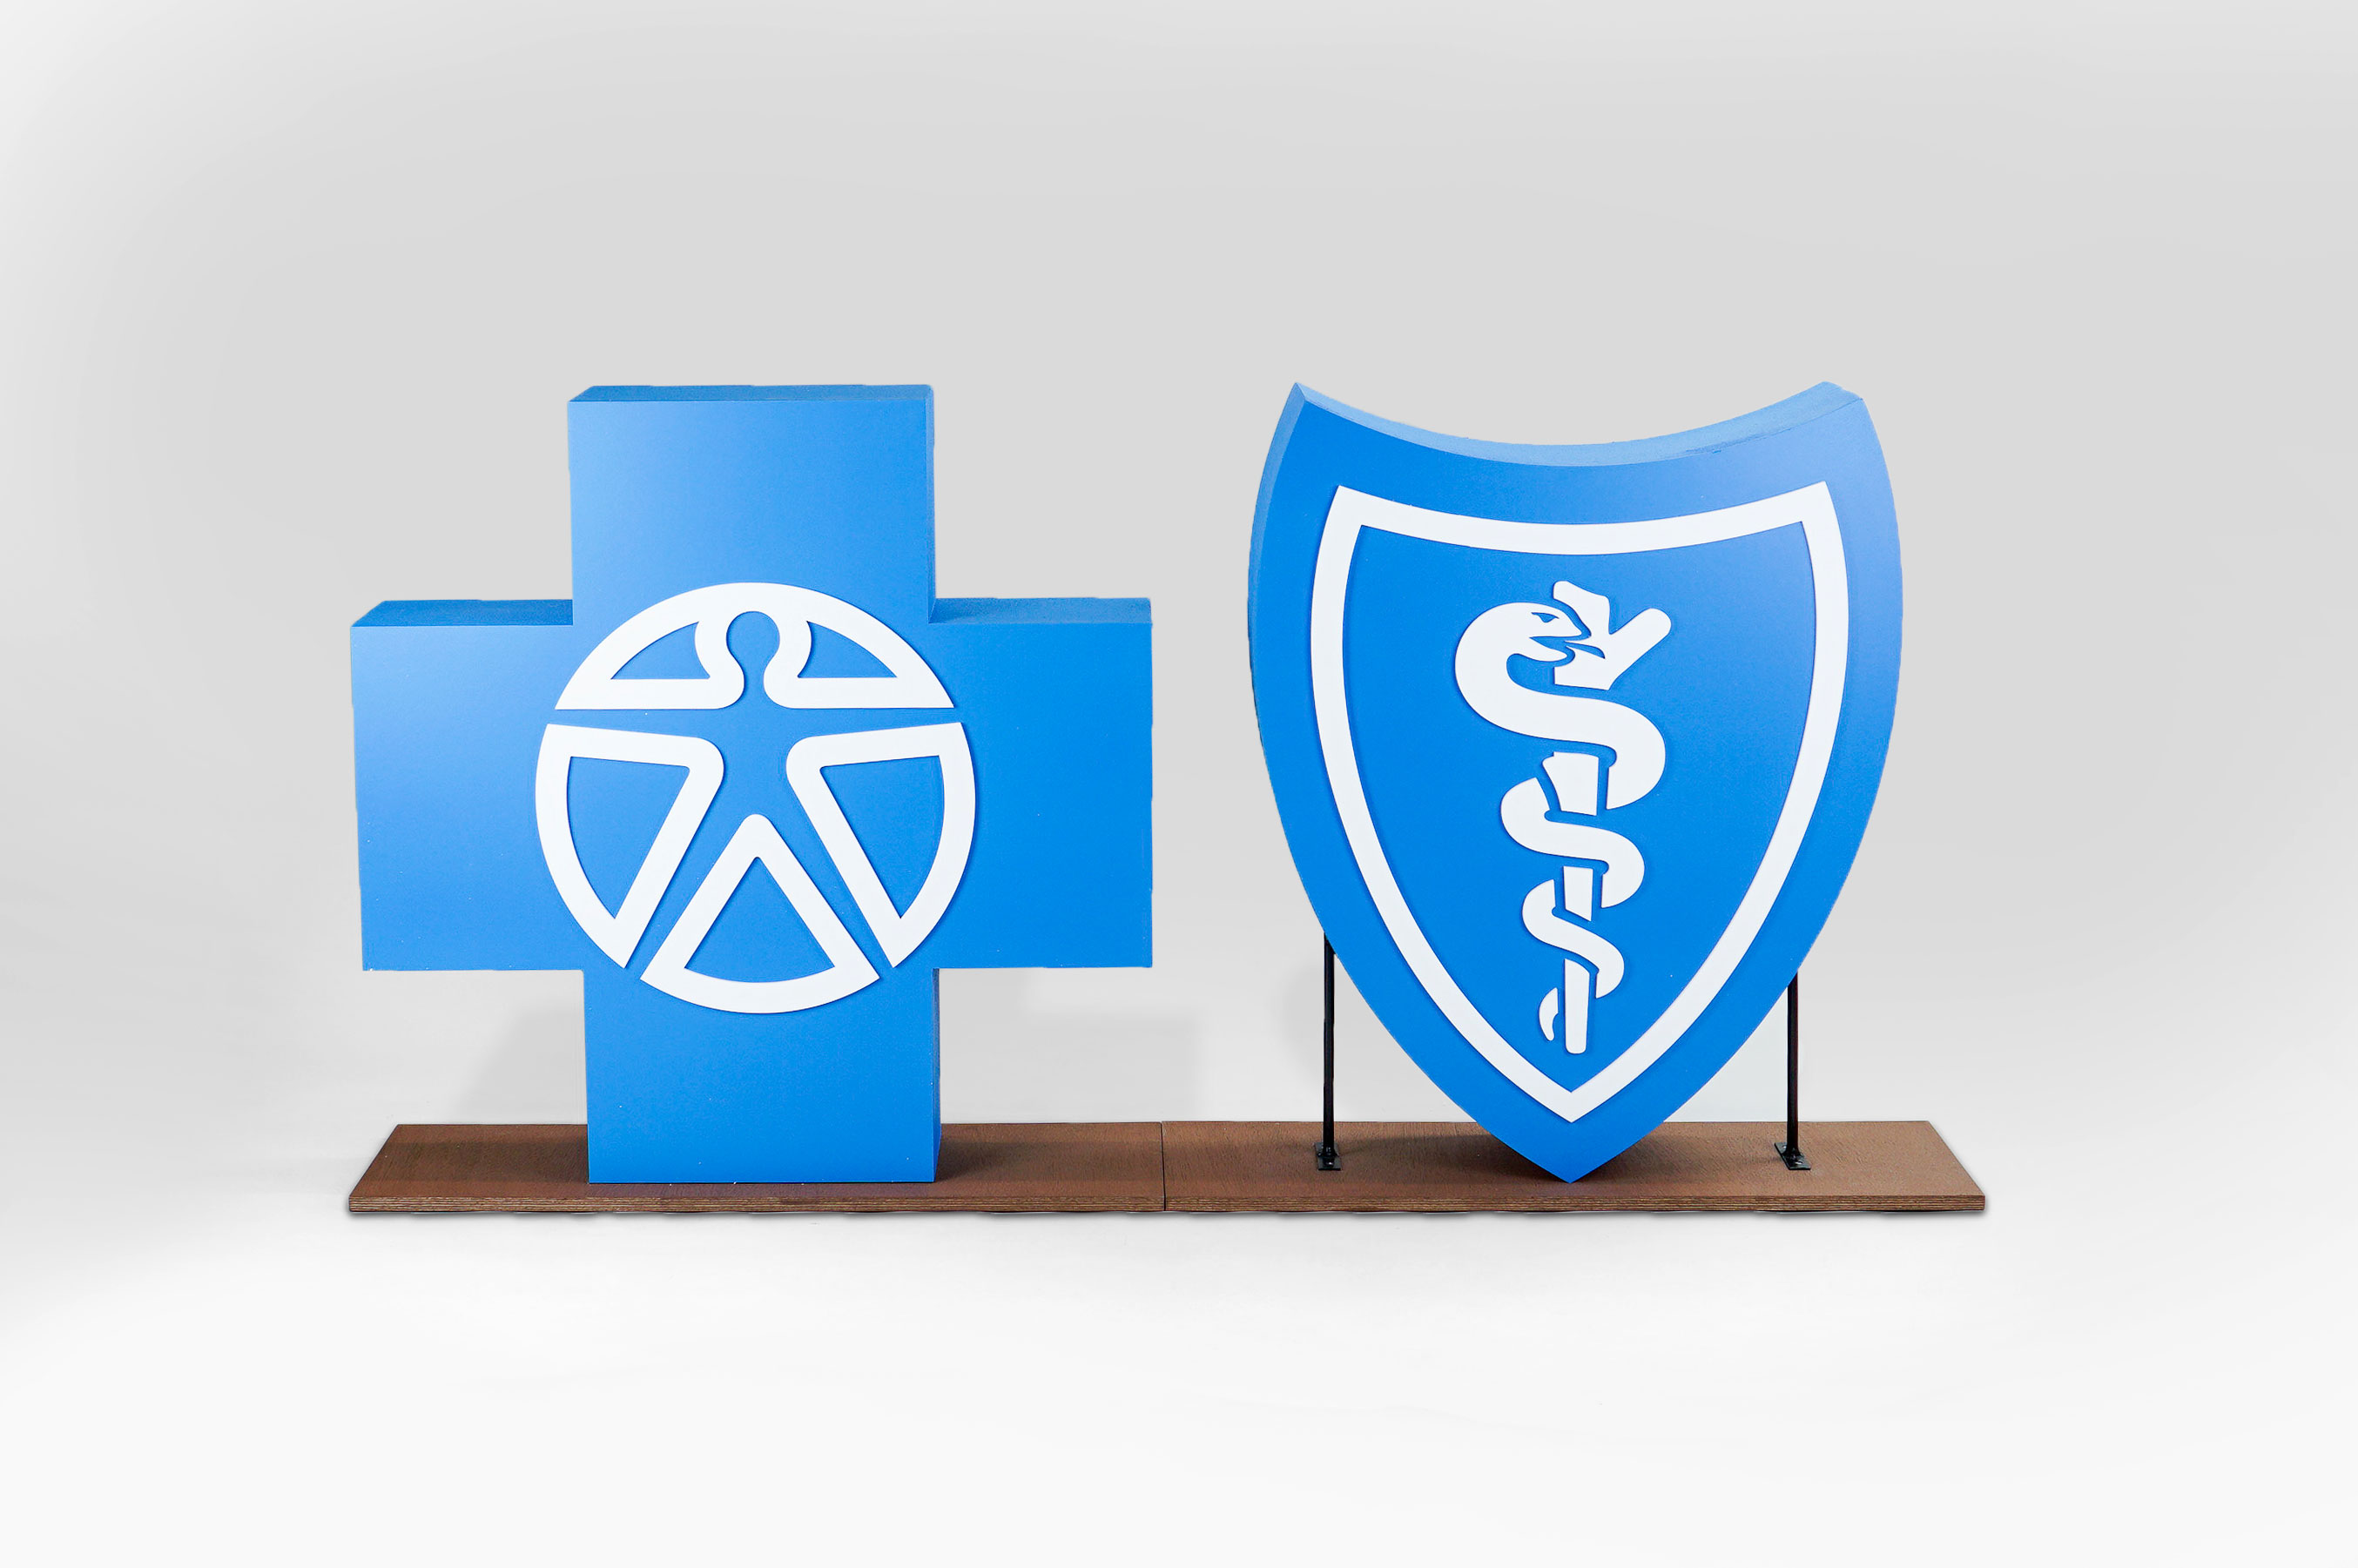 Large scale blue and white Blue Cross Blue Shield foam freestanding event logos for Aspen Event Works, a boutique event planning company specializing in creative and memorable event experiences.